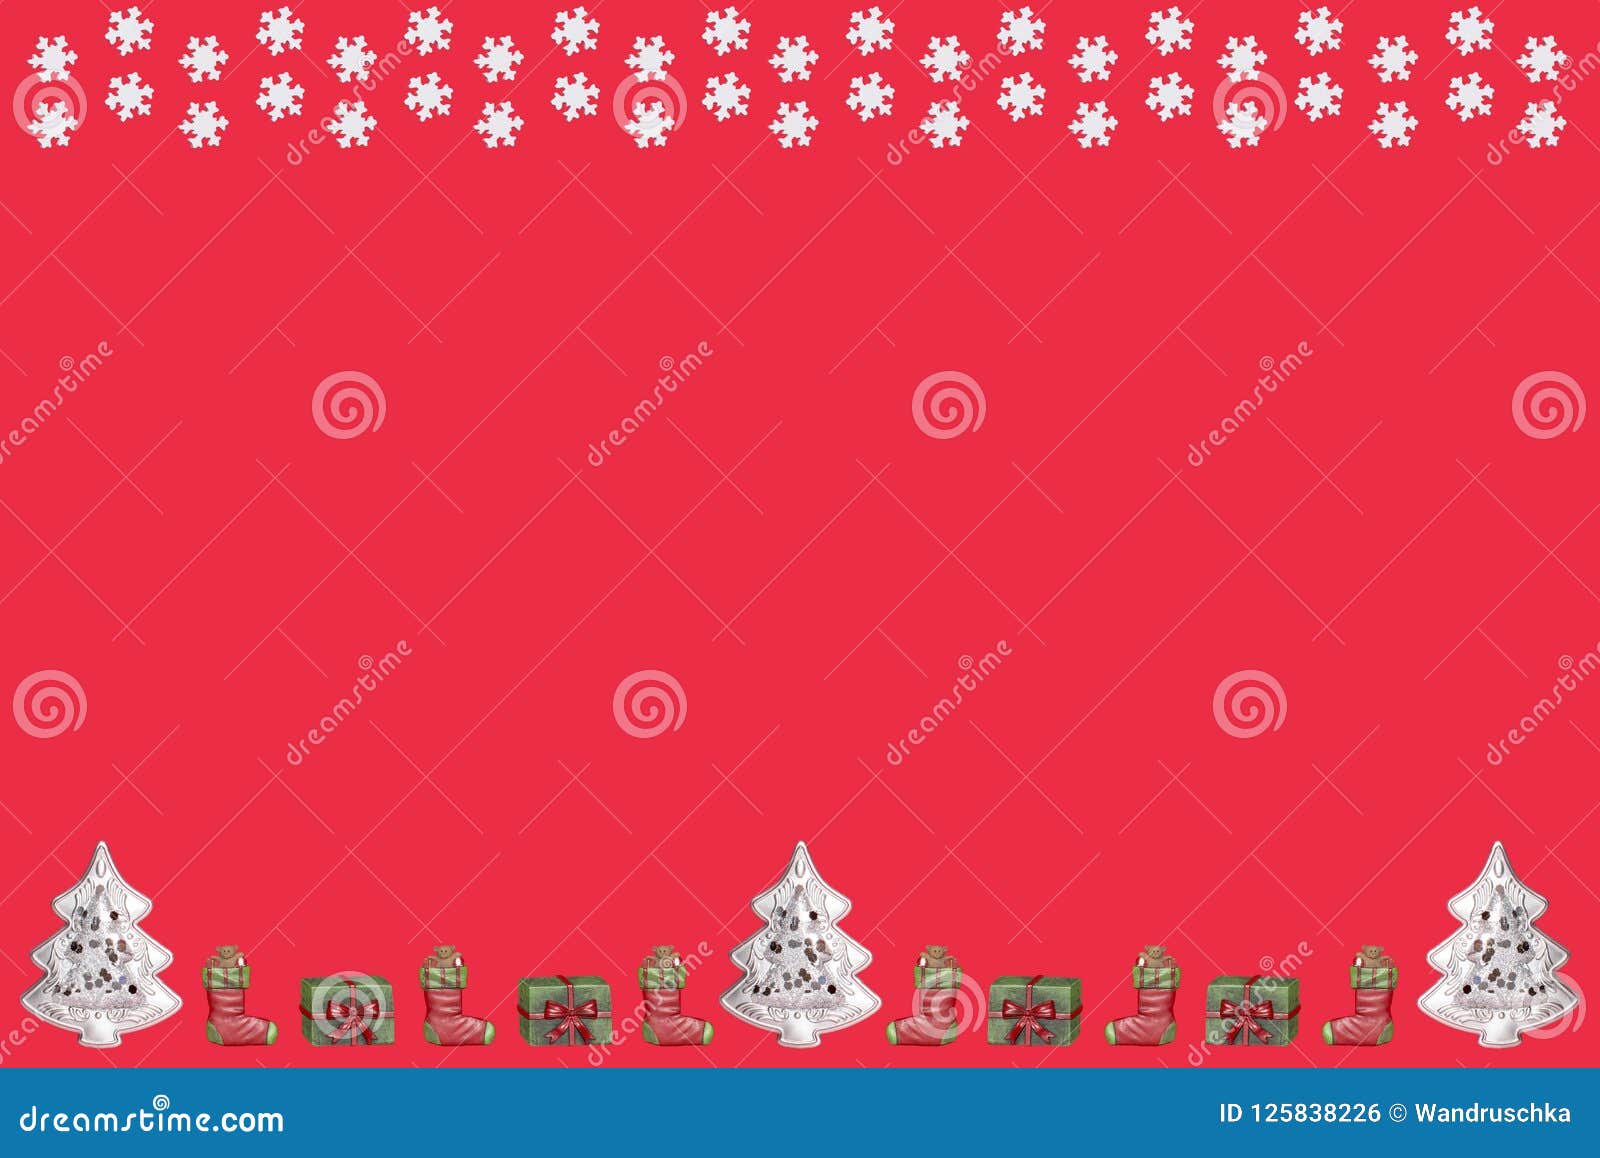 Handing Out Flyers Stock Illustrations – 12 Handing Out Flyers Stock  Illustrations, Vectors & Clipart - Dreamstime